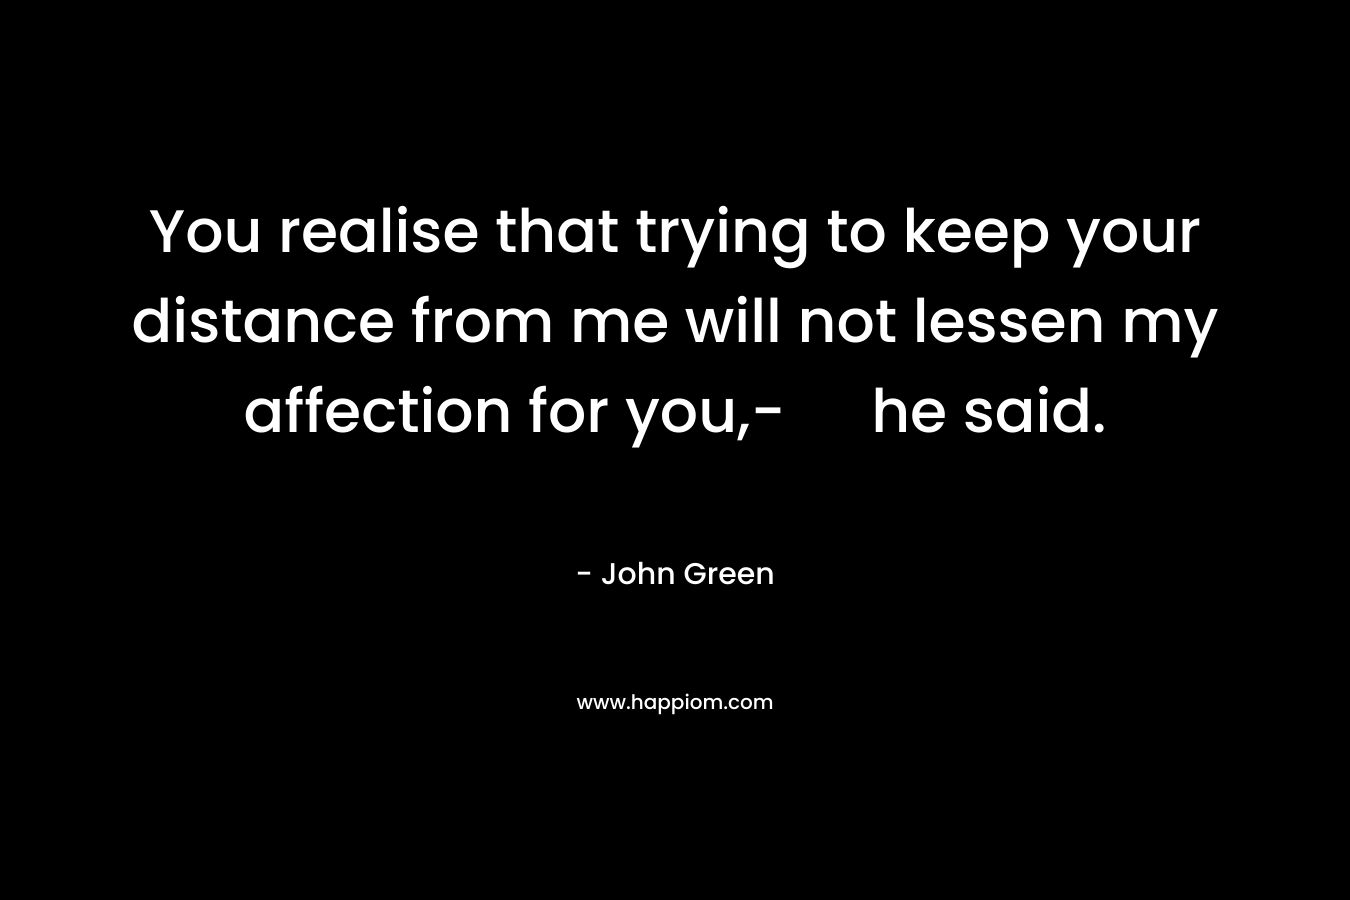 You realise that trying to keep your distance from me will not lessen my affection for you,- he said. – John Green